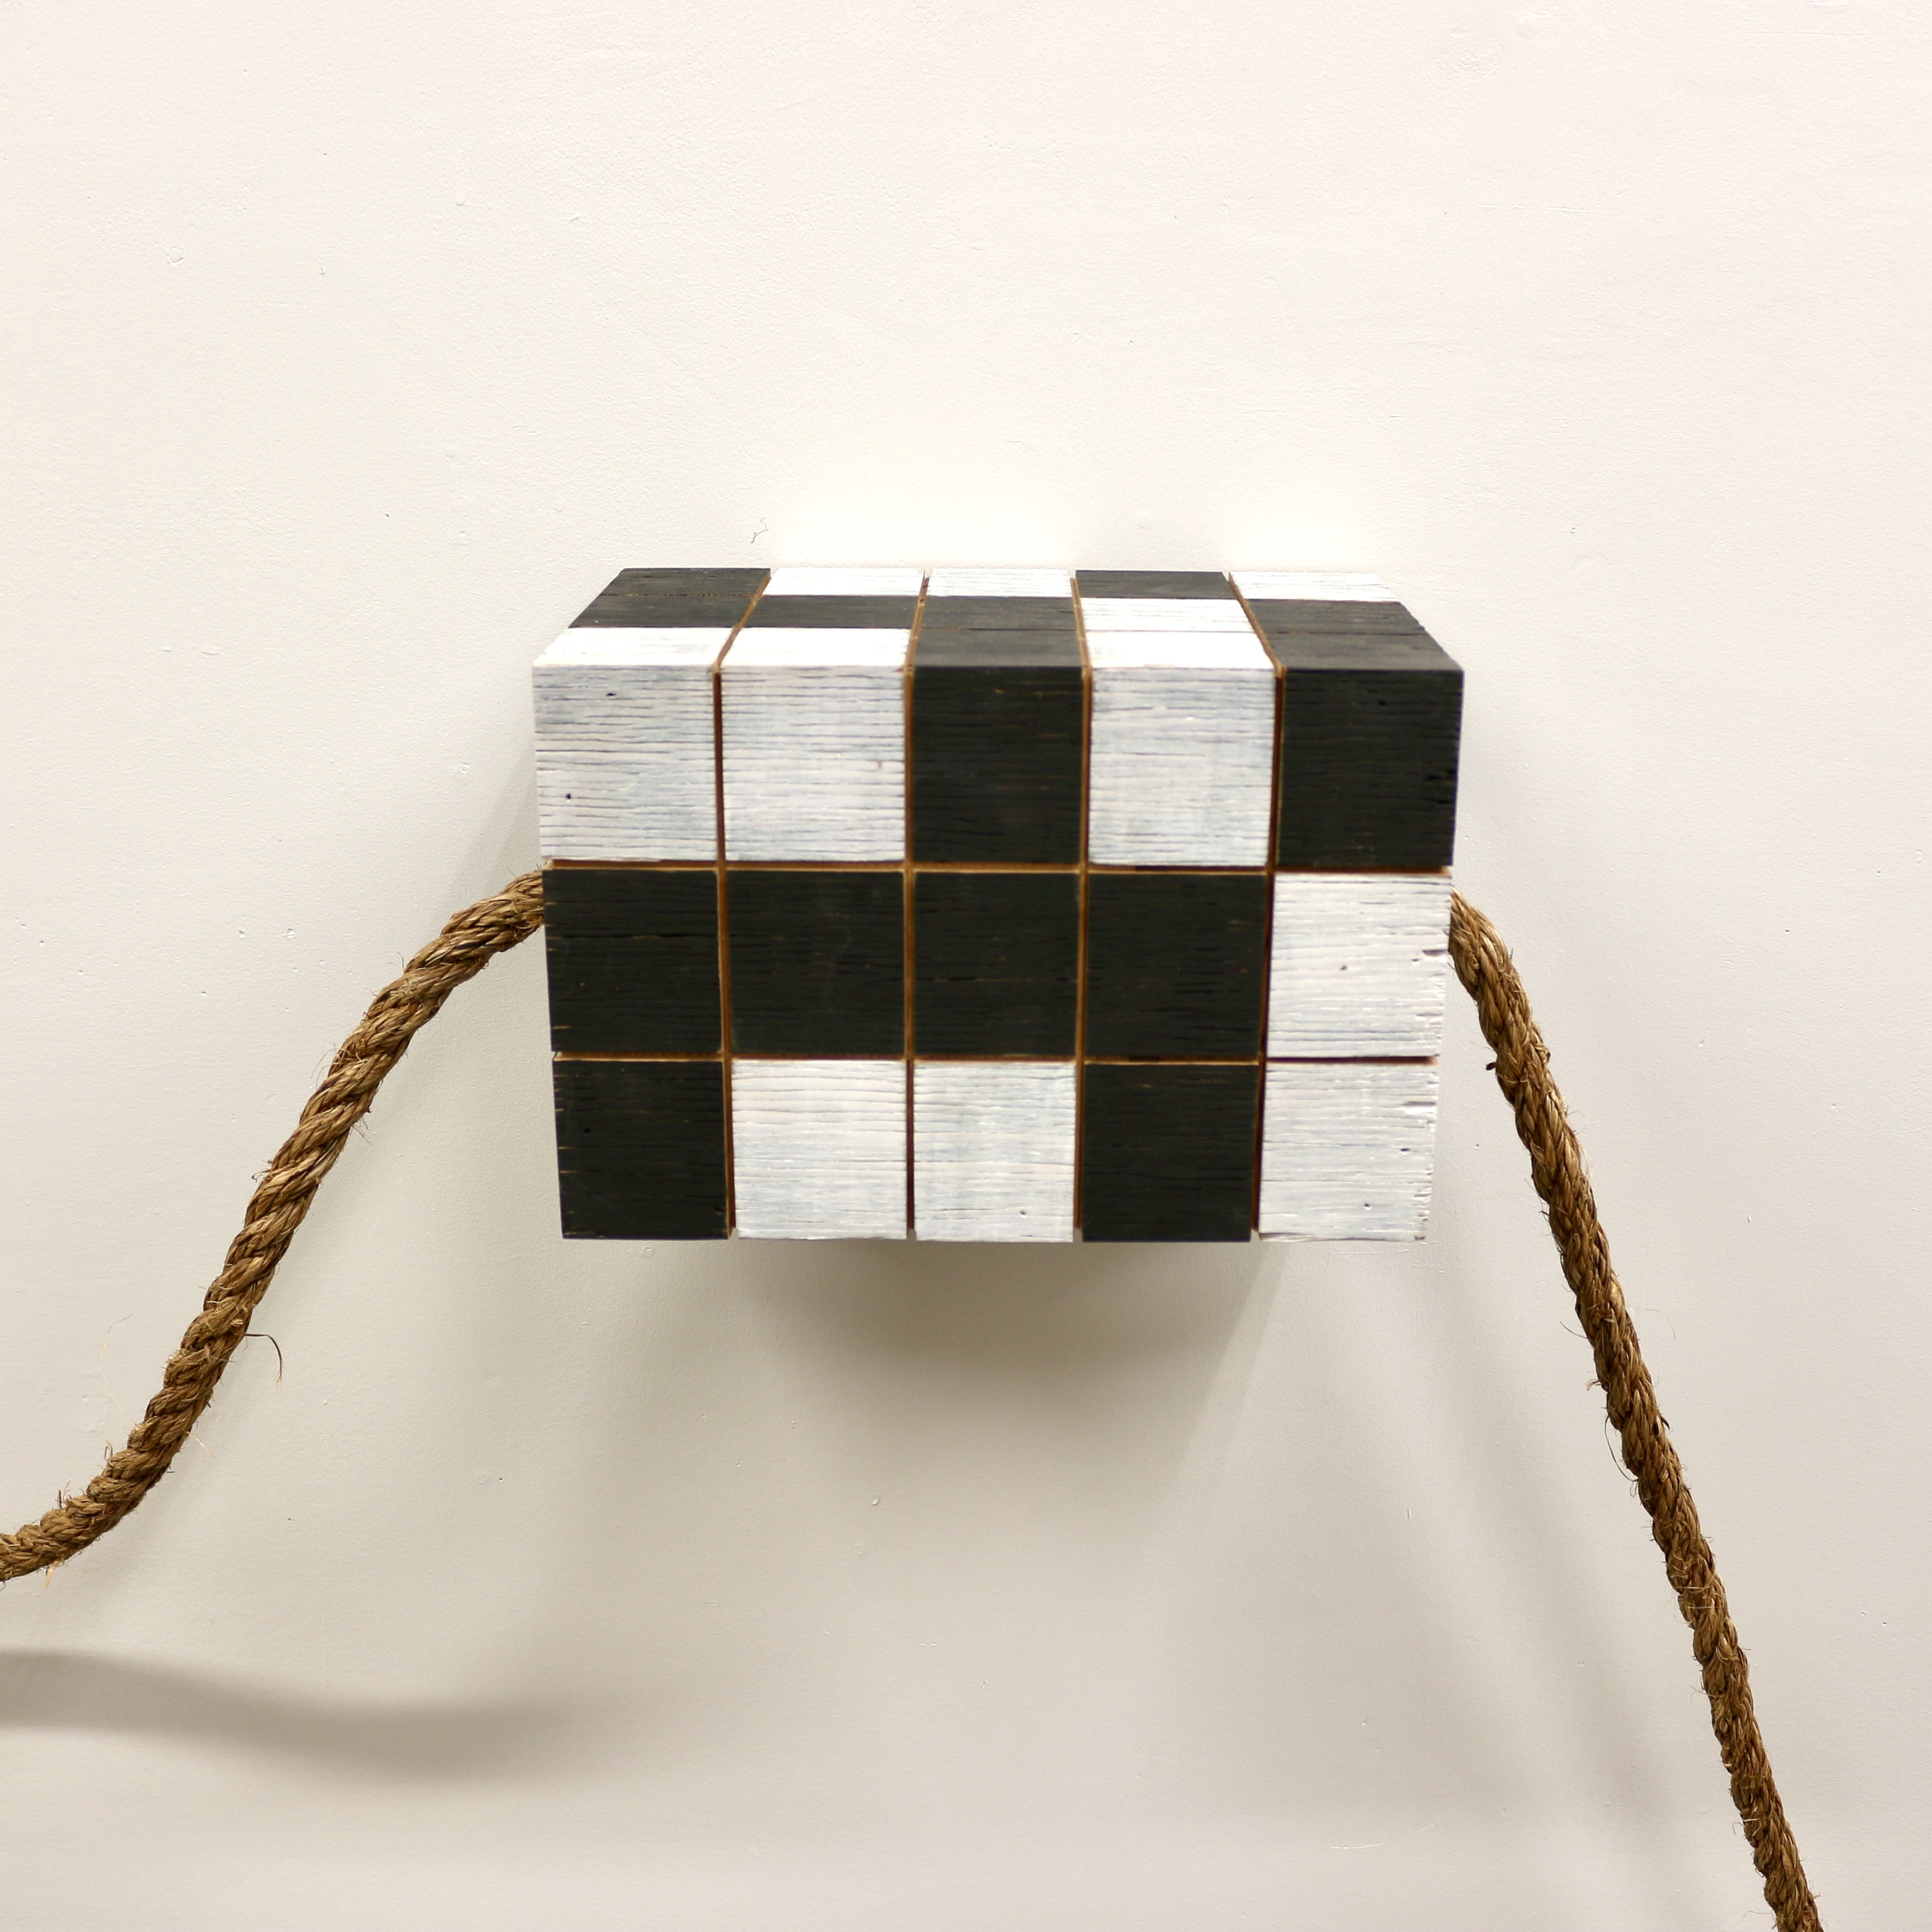 Sculpture in black and white that looks like a Rubic's Cube